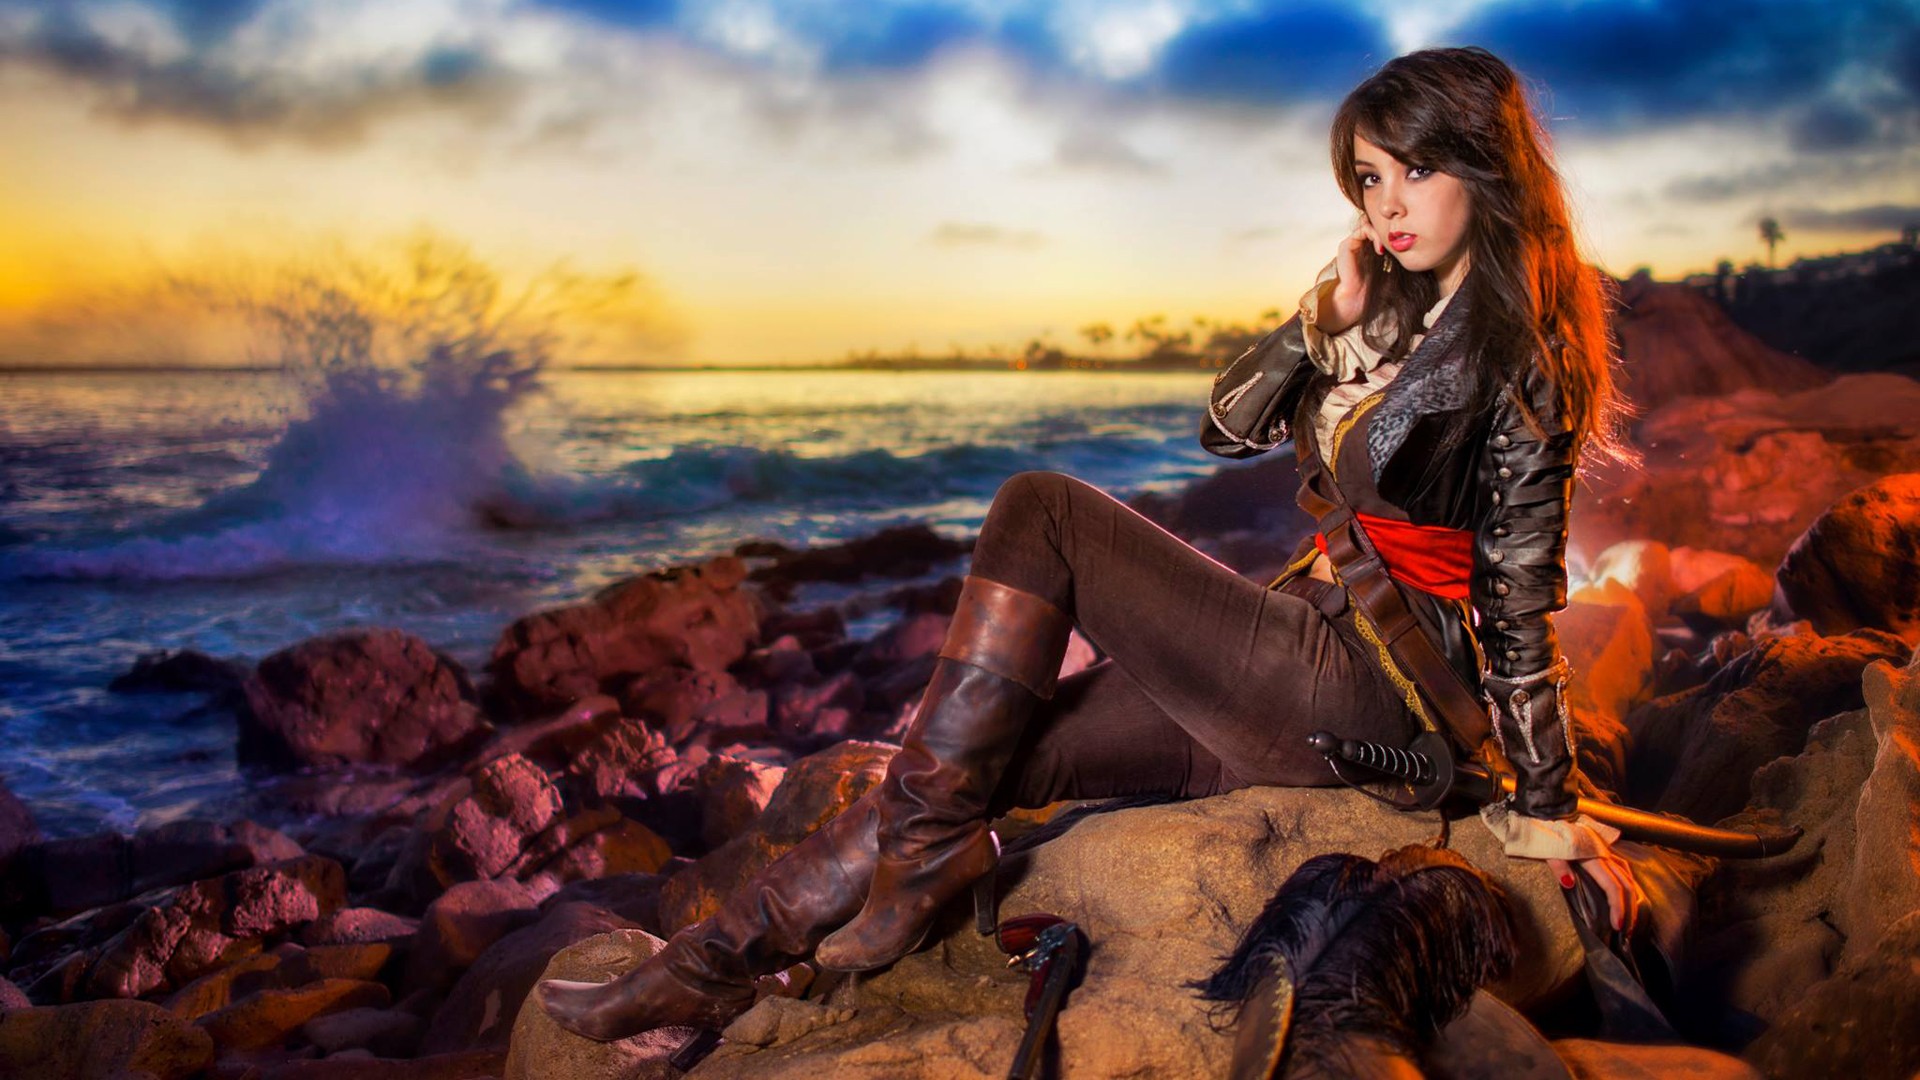 People 1920x1080 Assassin's Creed cosplay Monika Lee pirates heels boots women model sitting video game girls long hair makeup lipstick sword women with swords looking at viewer